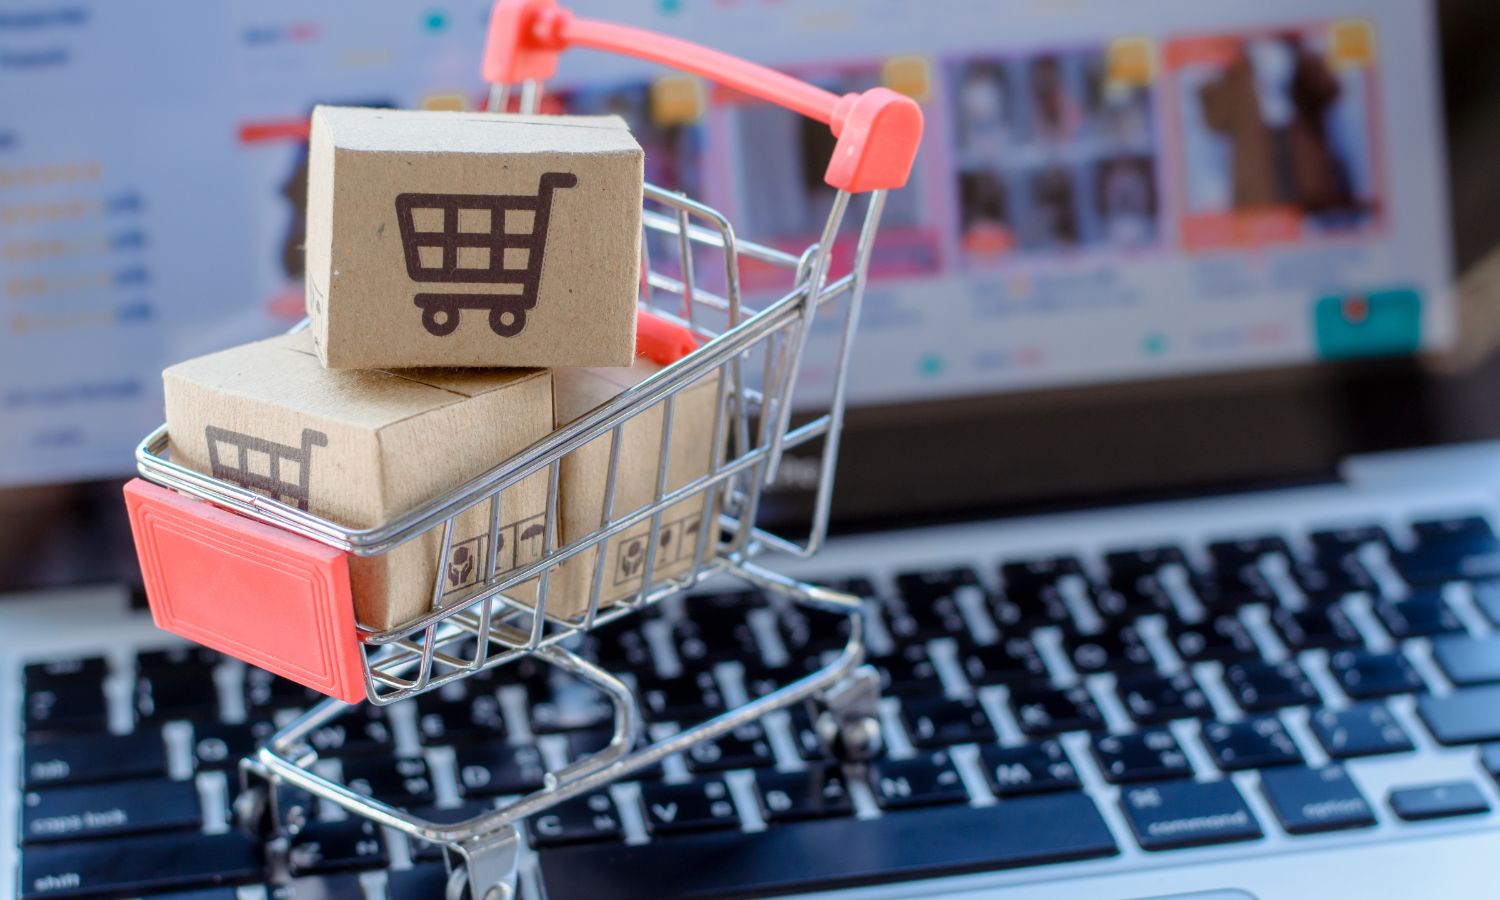 How to shop online safely